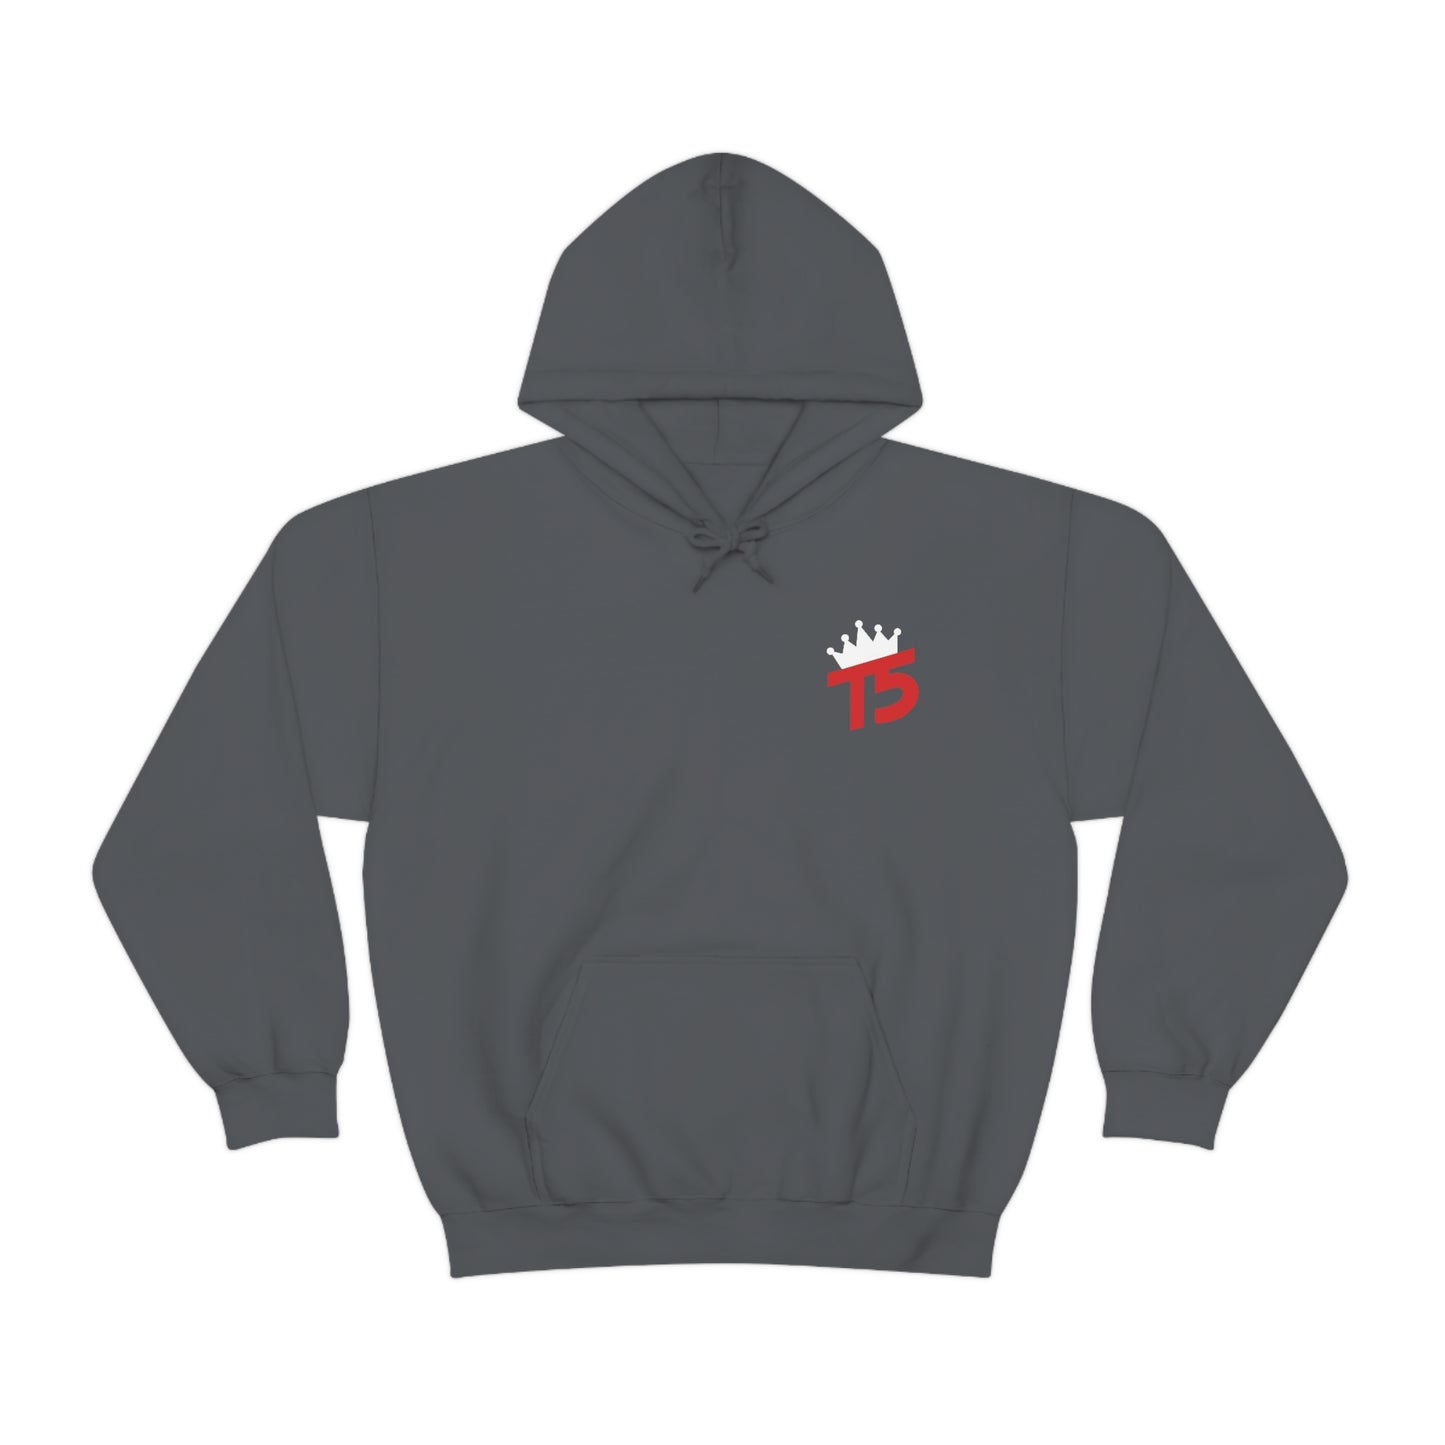 Terry Anderson: T5(Spider) Hoodie